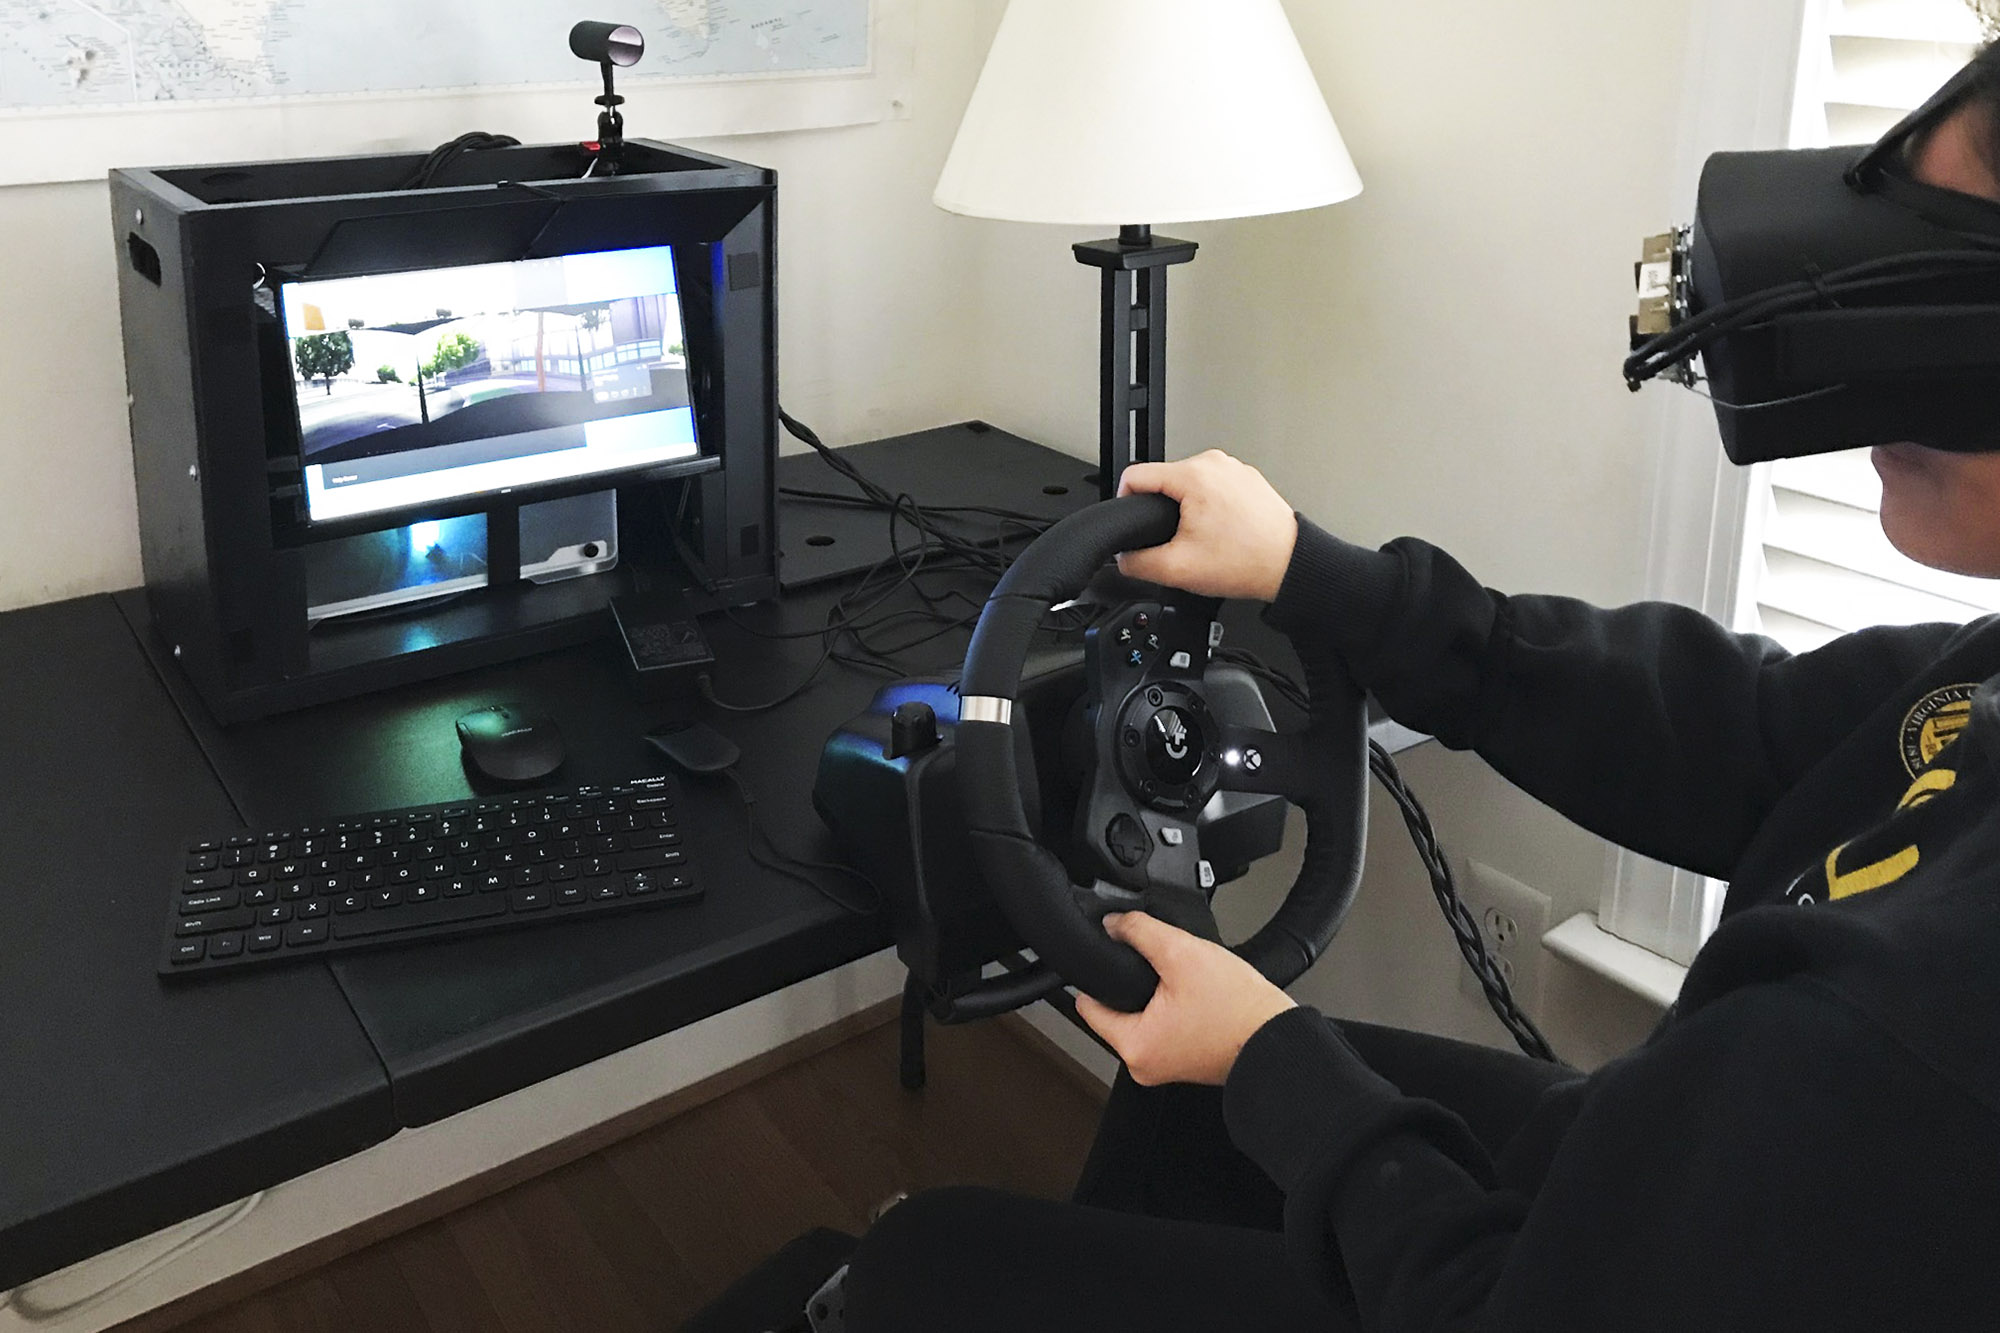 UVA Driving Simulator Goes to Help More People With Autism | UVA Today